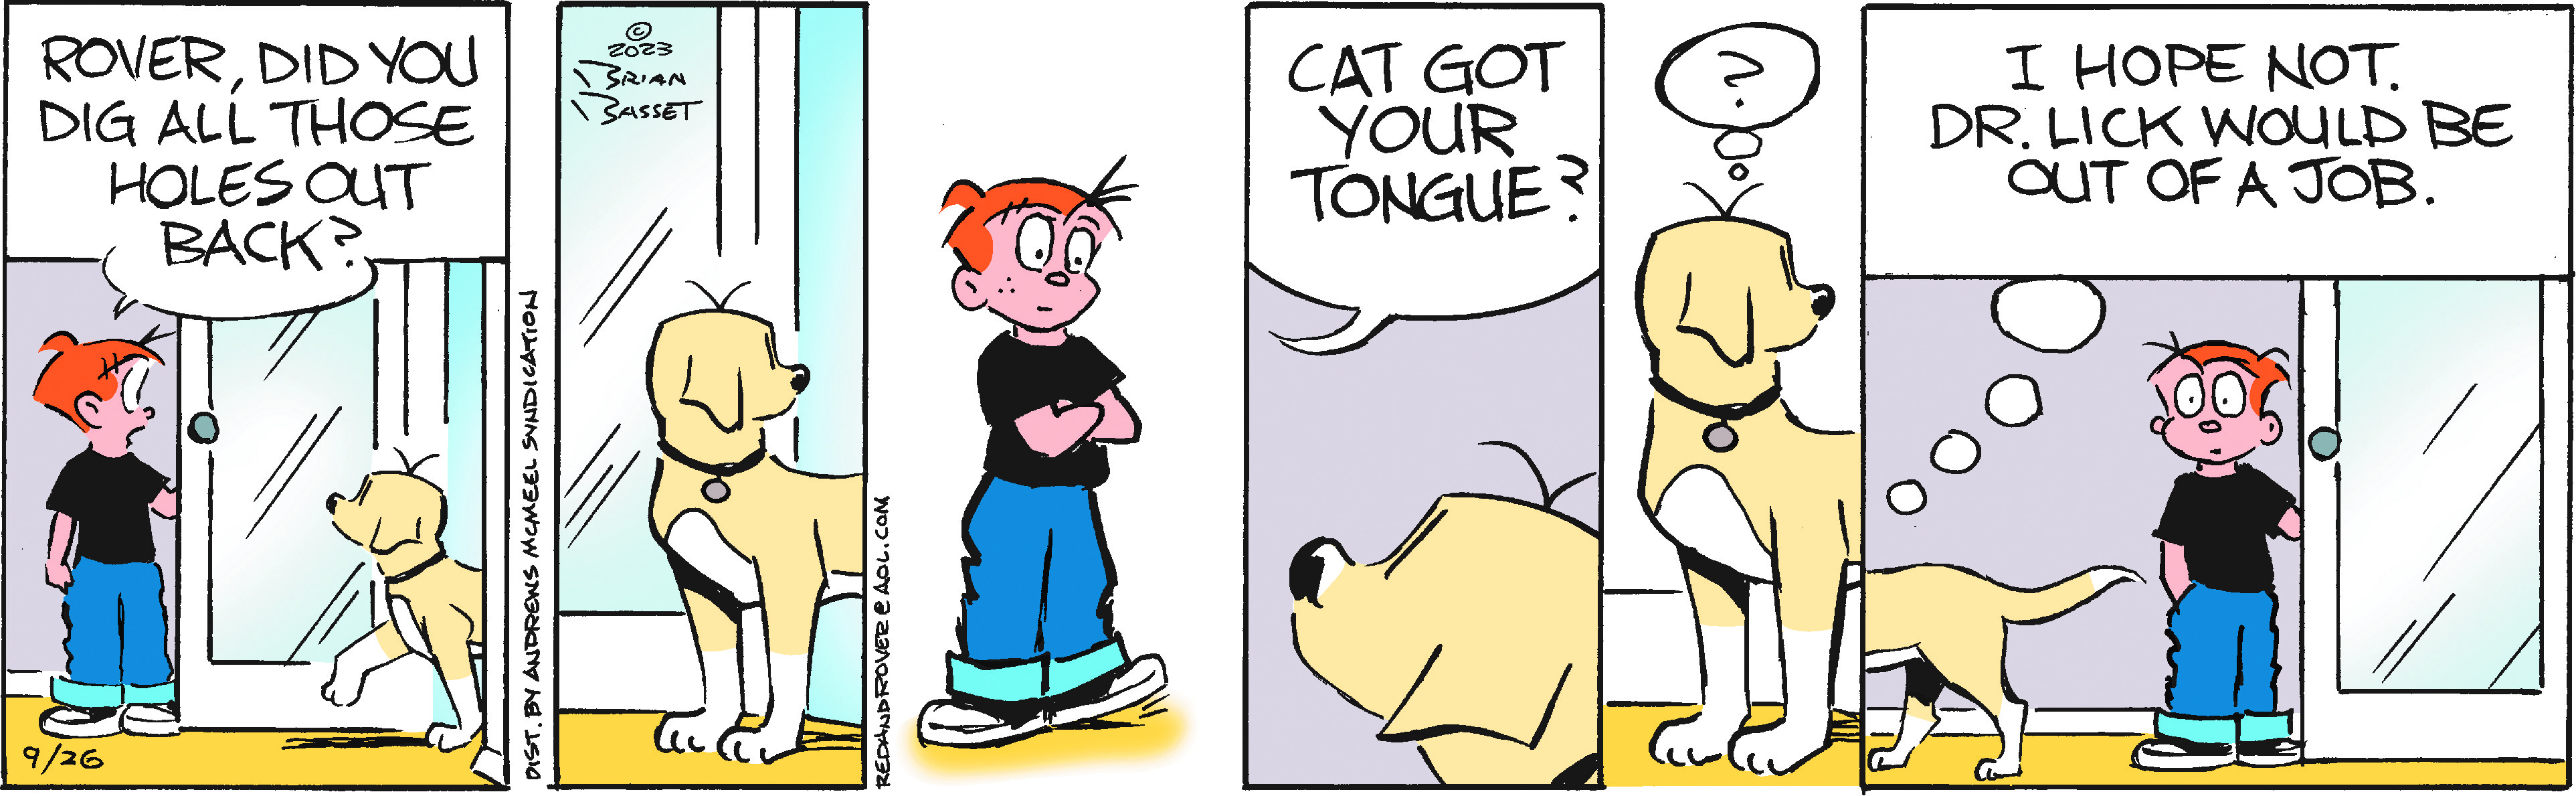 Today on Red and Rover - Comics by Brian Basset - GoComics